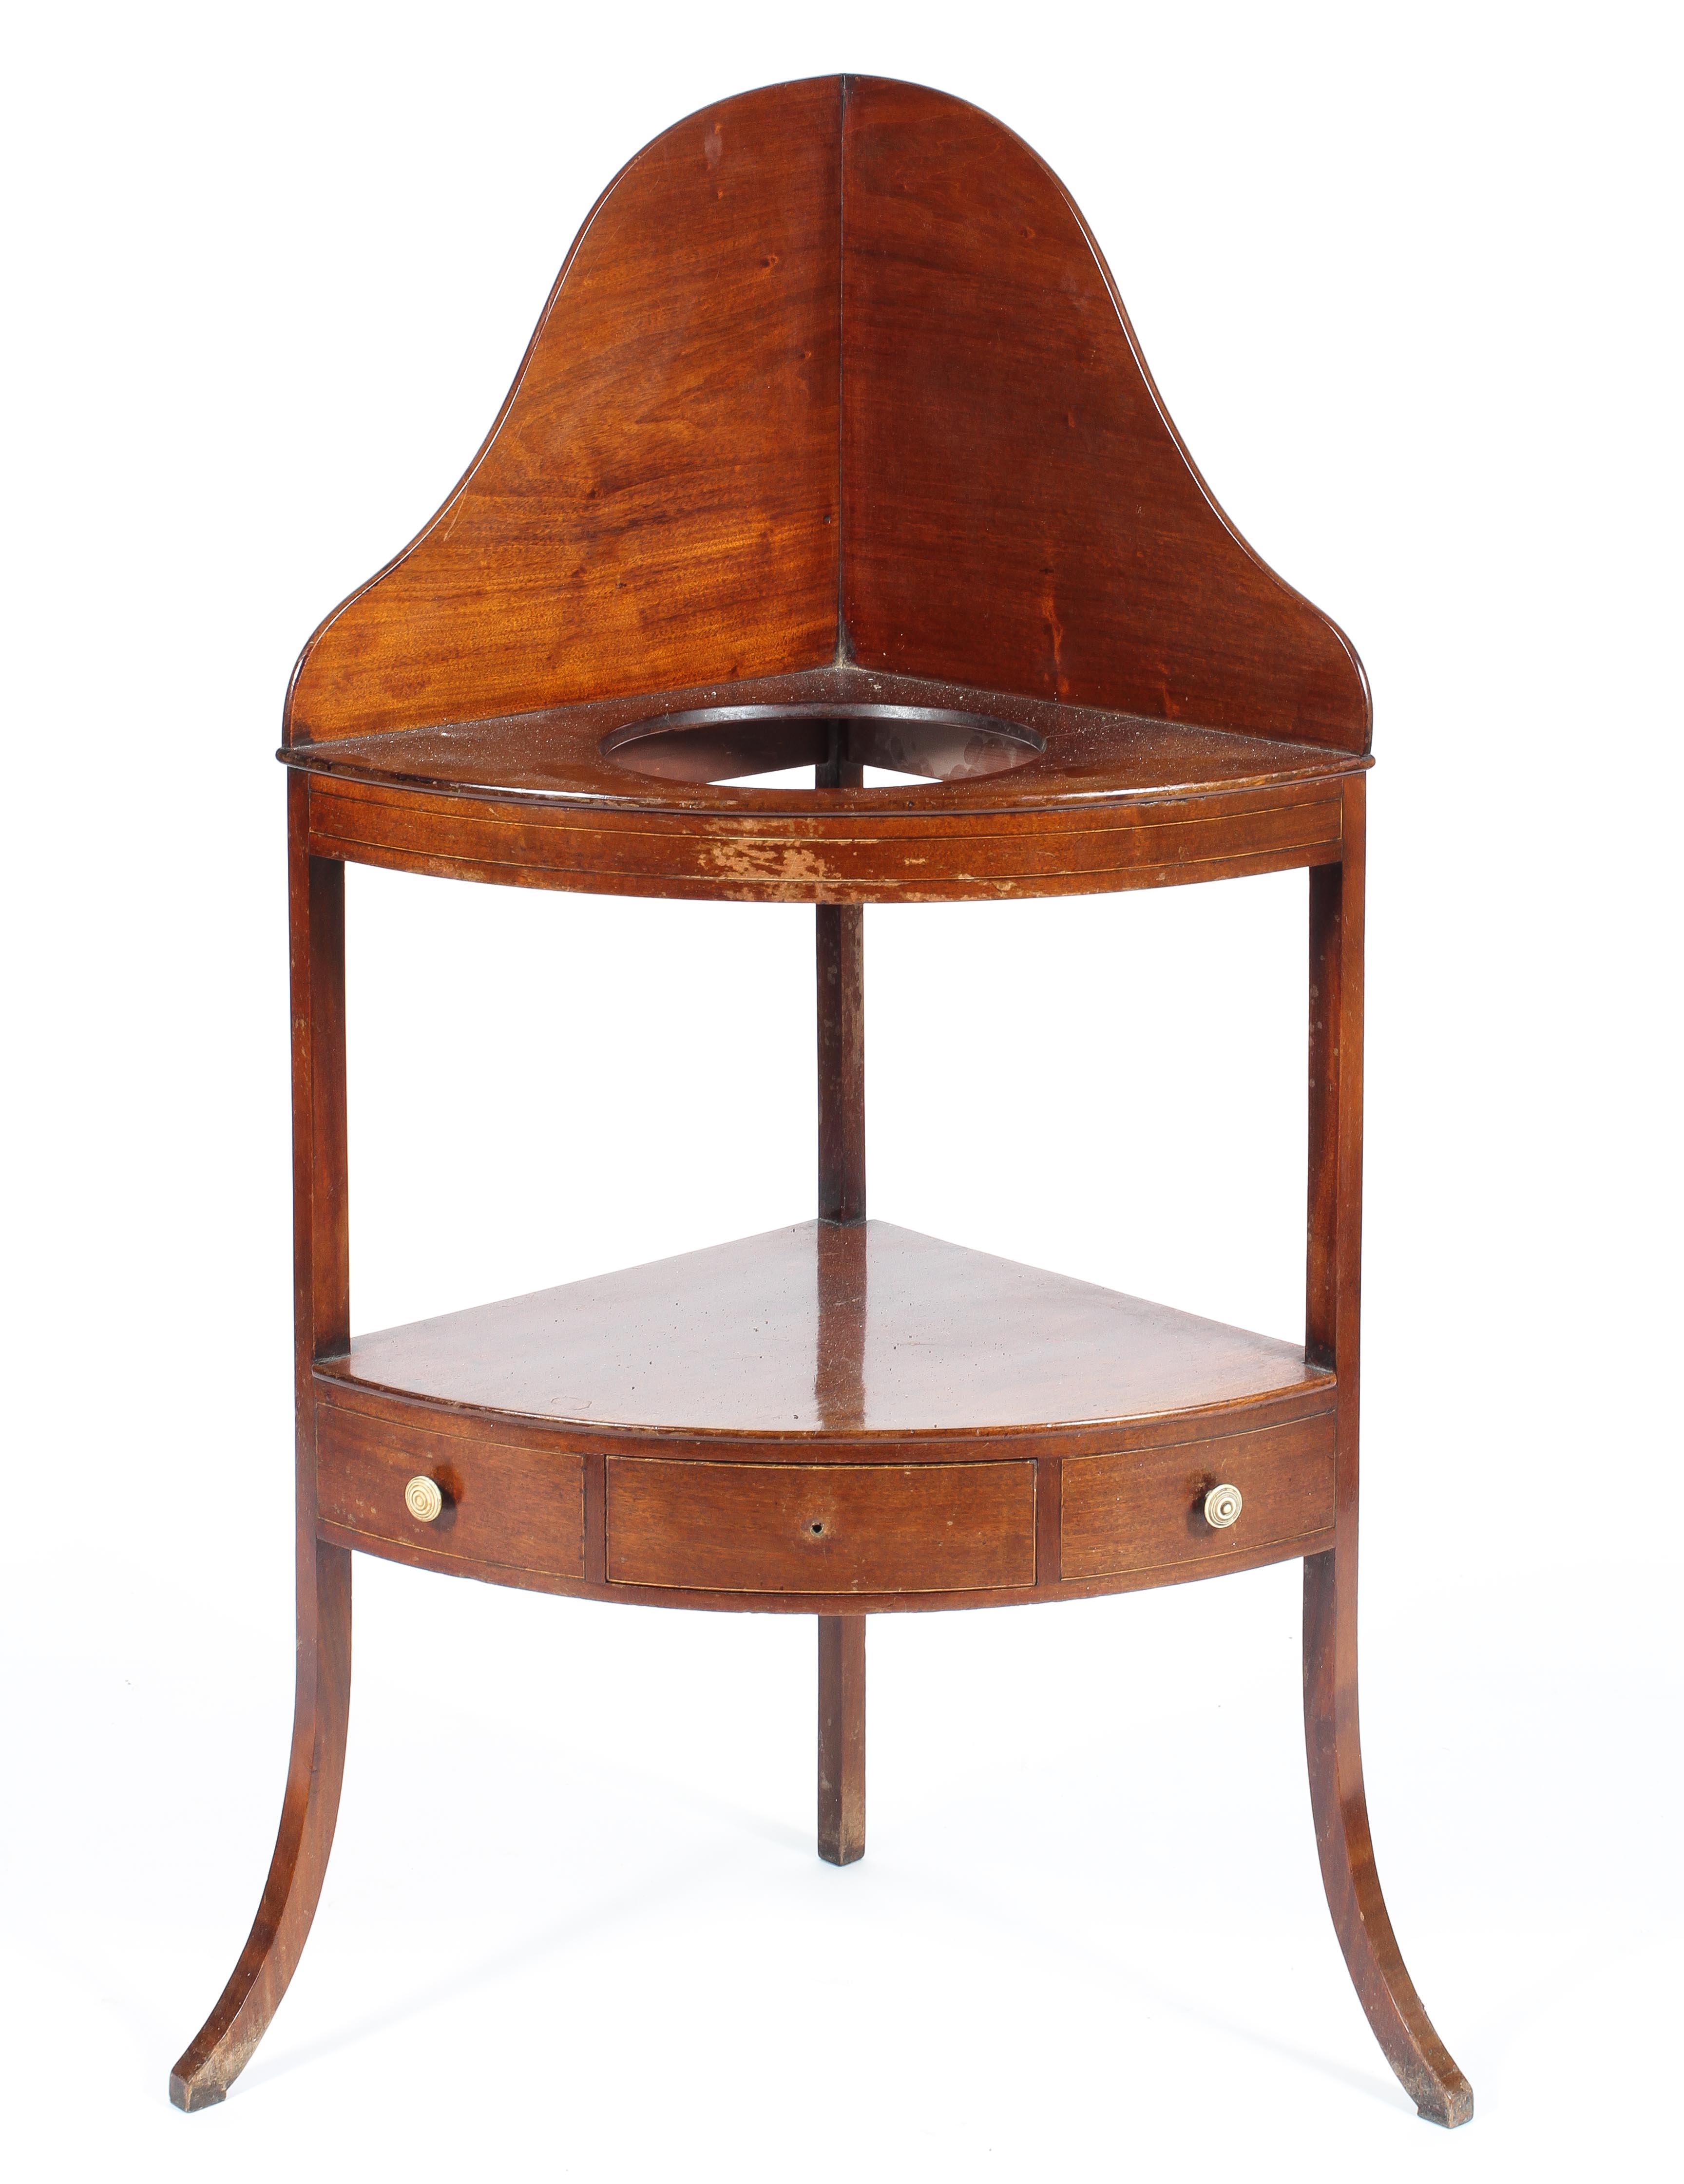 A 19th century corner washstand with central drawer